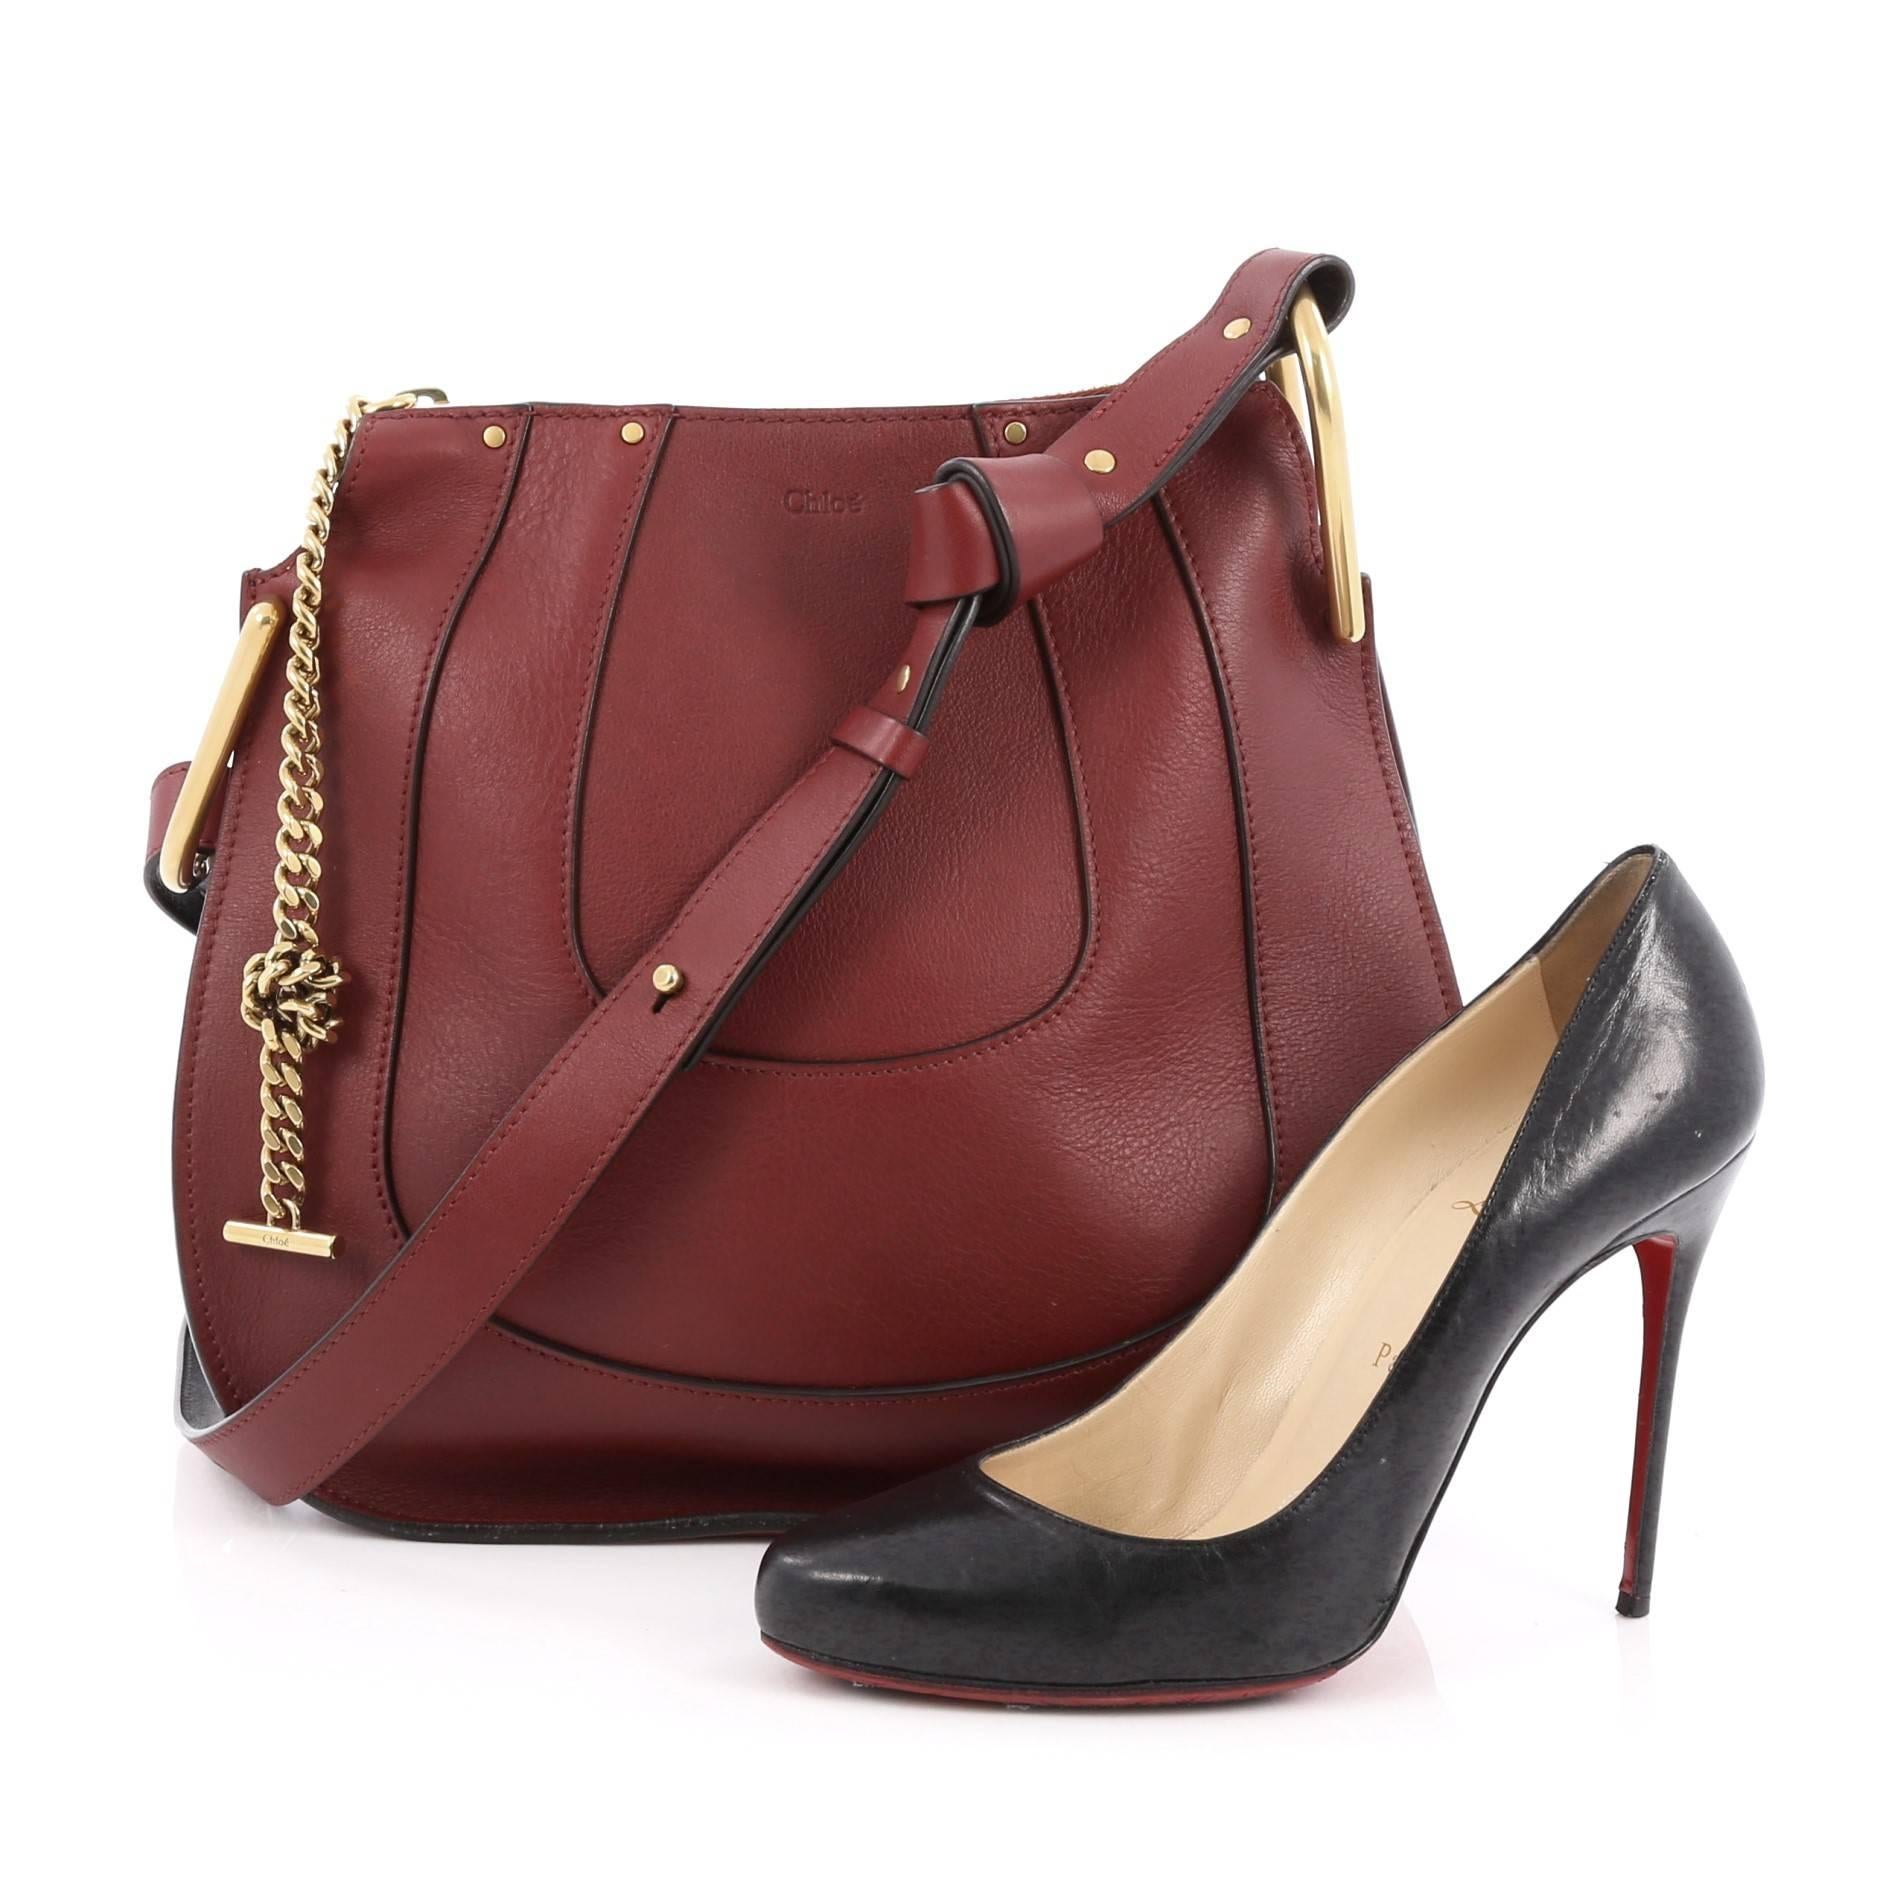 This authentic Chloe Hayley Hobo Leather Small mixes casual-bohemian styling with luxurious edge made for the Chloe girl. Crafted from dark red leather, this hobo bag features adjustable shoulder strap, chain insets, saddle-shaped silhouette, and